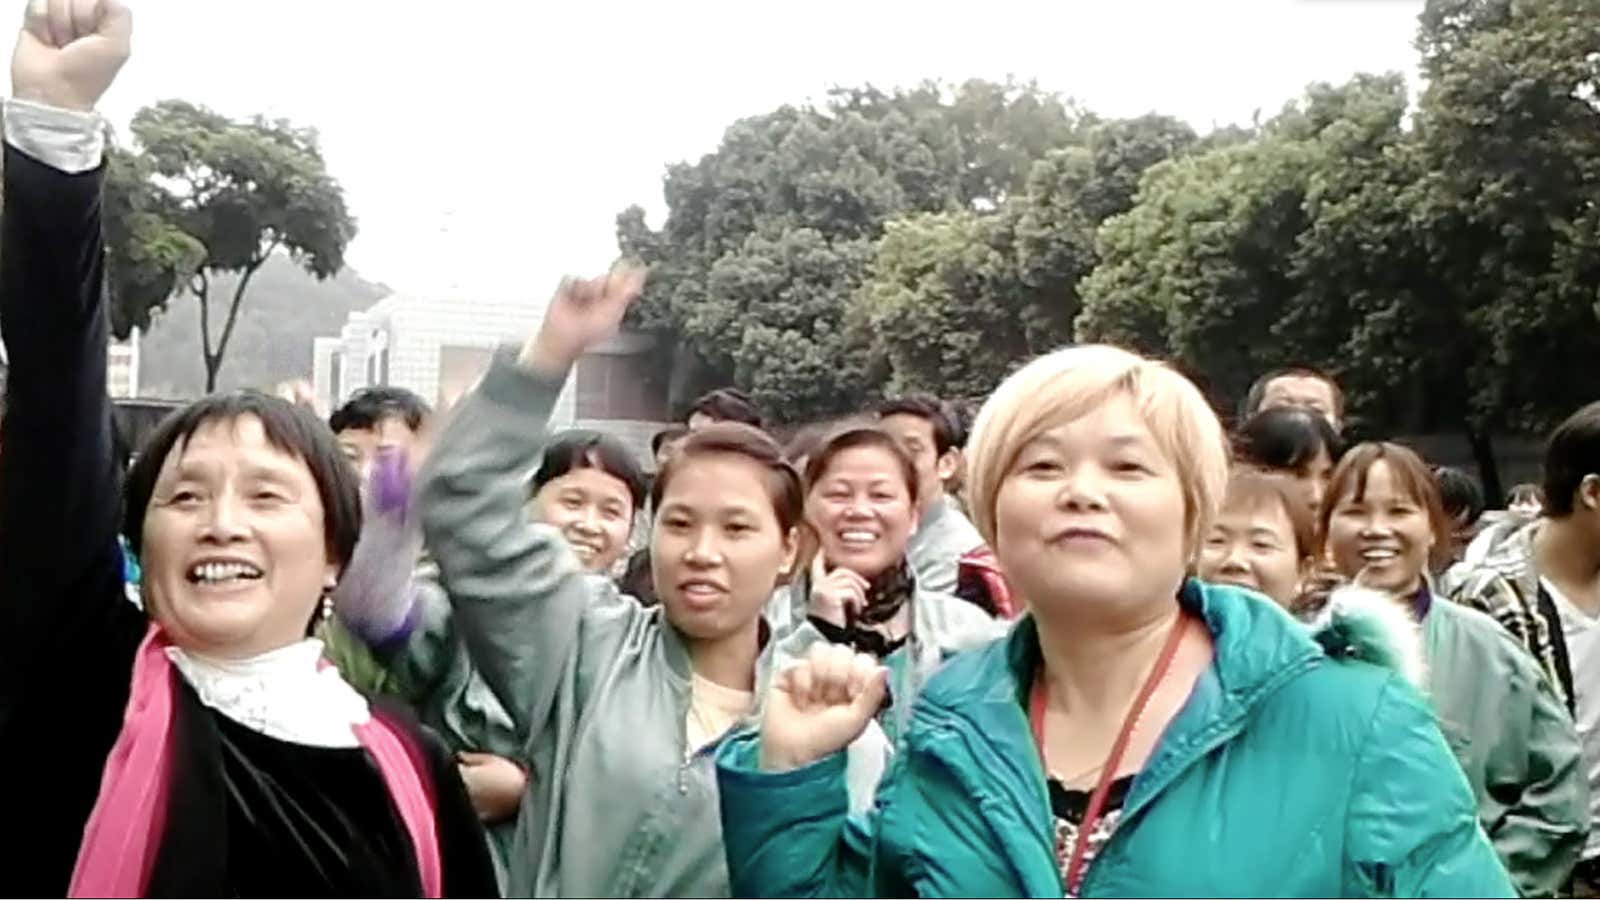 Workers at the Lide Shoe Factory shout “give us back our hard-earned money” during a Dec. 2014 strike.